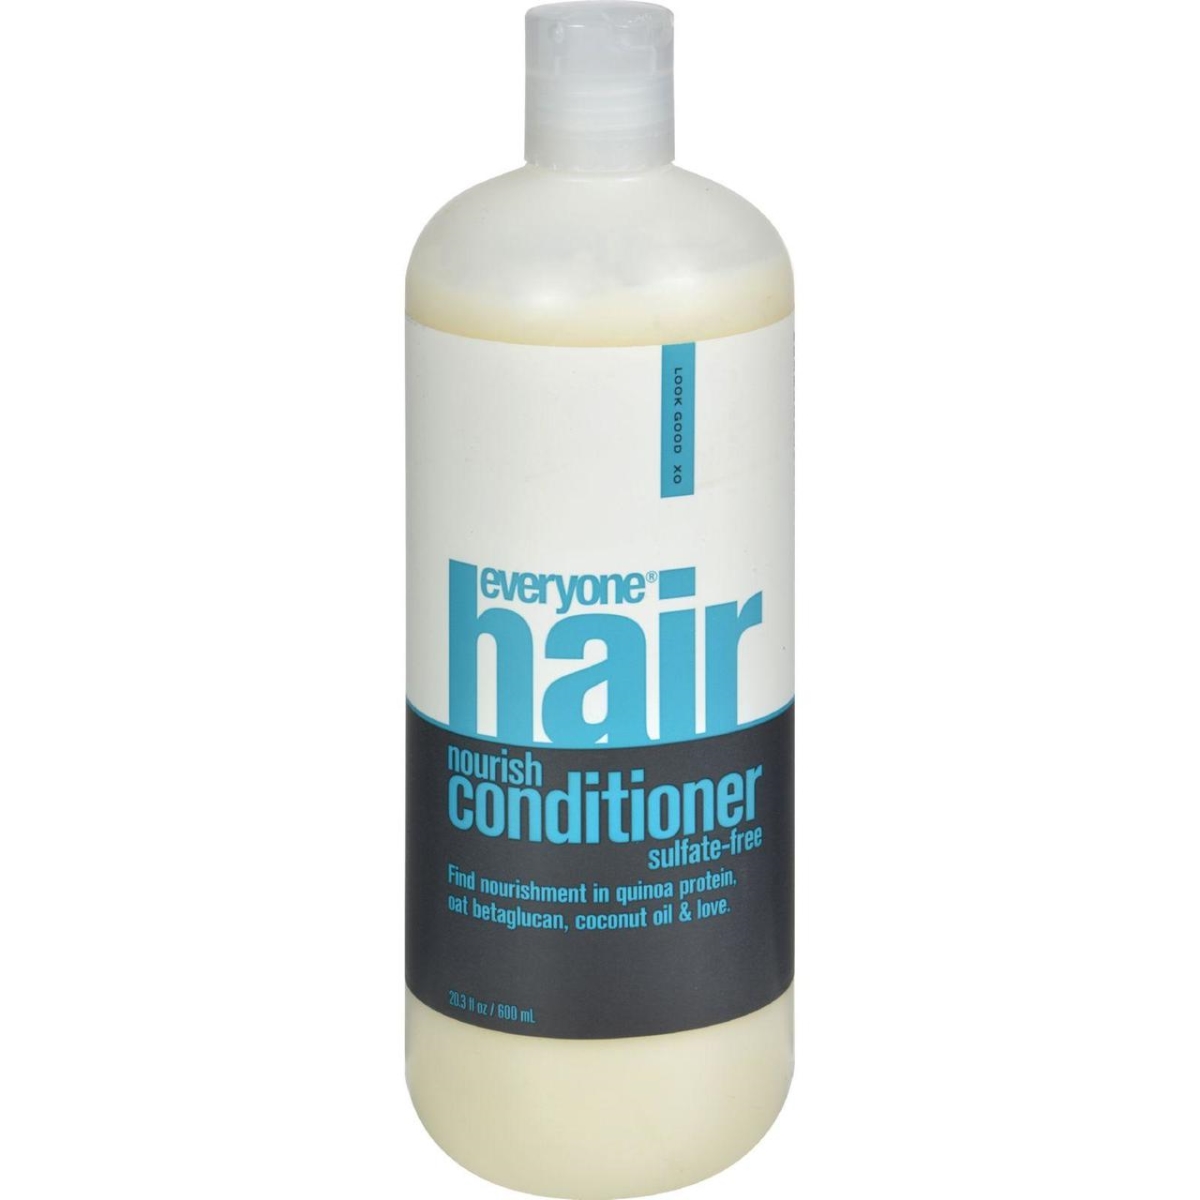 Hg1513761 20 Fl Oz Sulfate Free Nourish Conditioner For Everyone Hair